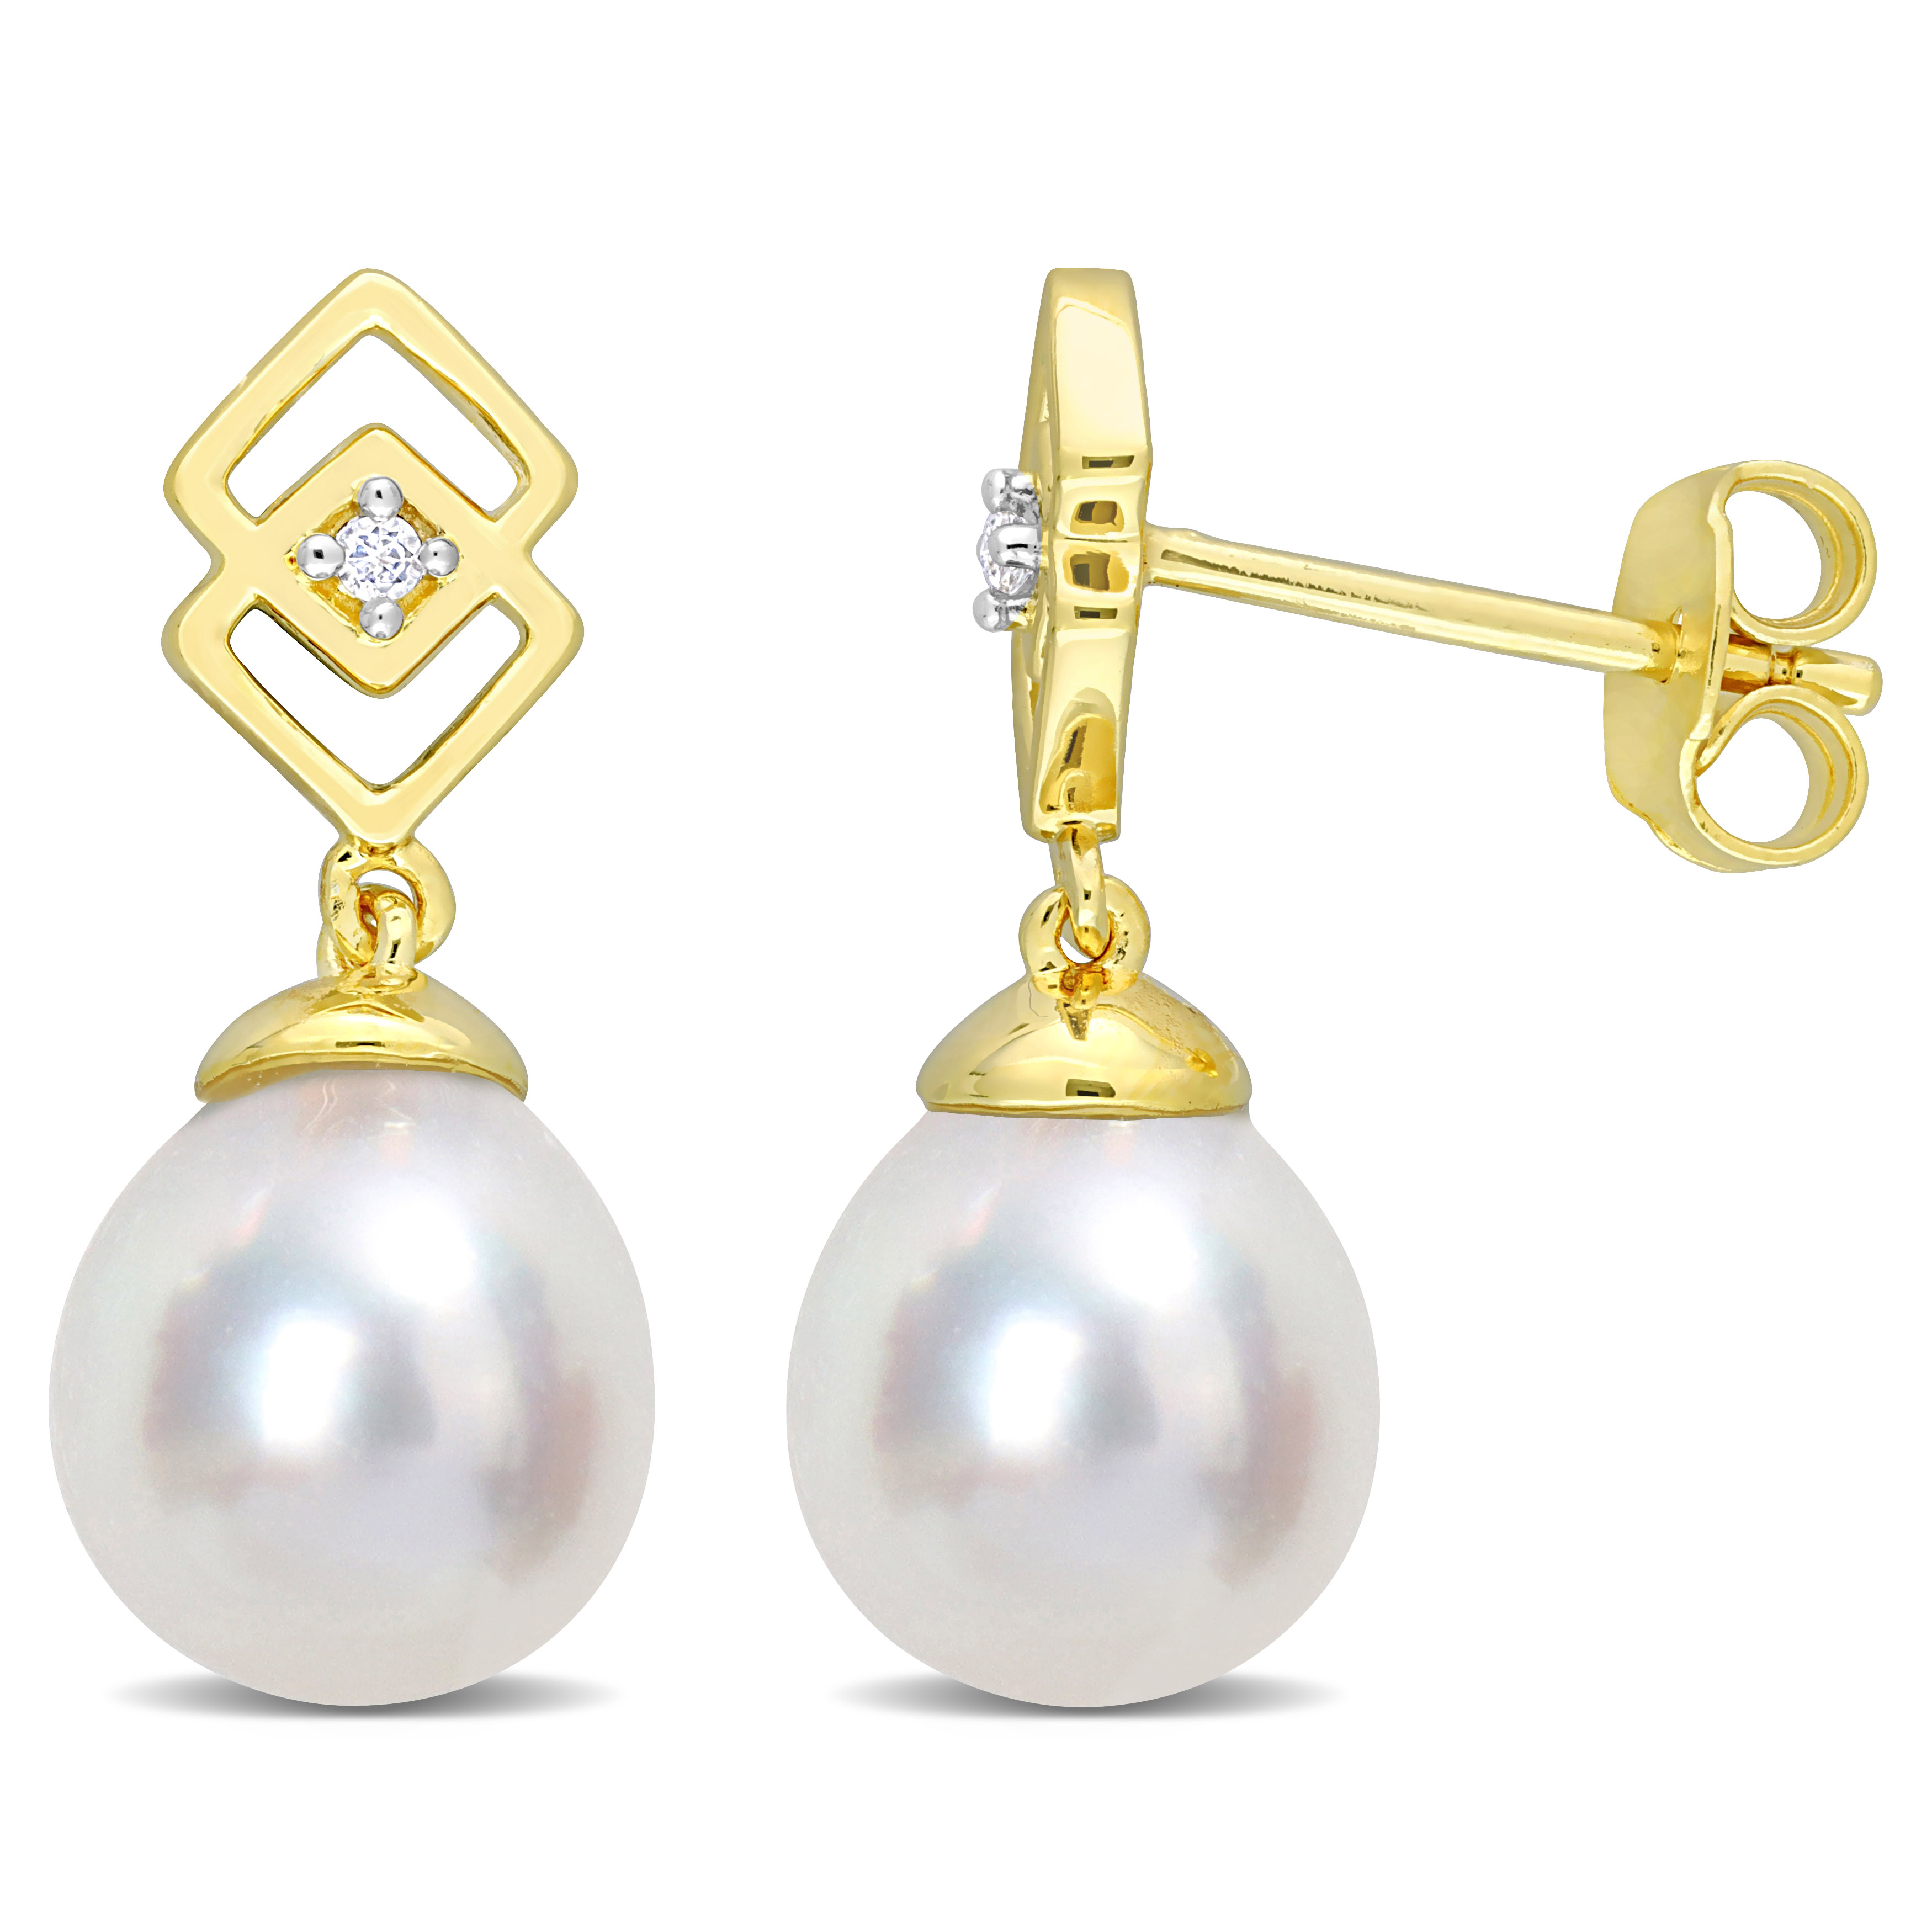 8-9 MM South Sea Cultured Pearl and White Topaz Drop Earrings in Yellow Plated Sterling Silver